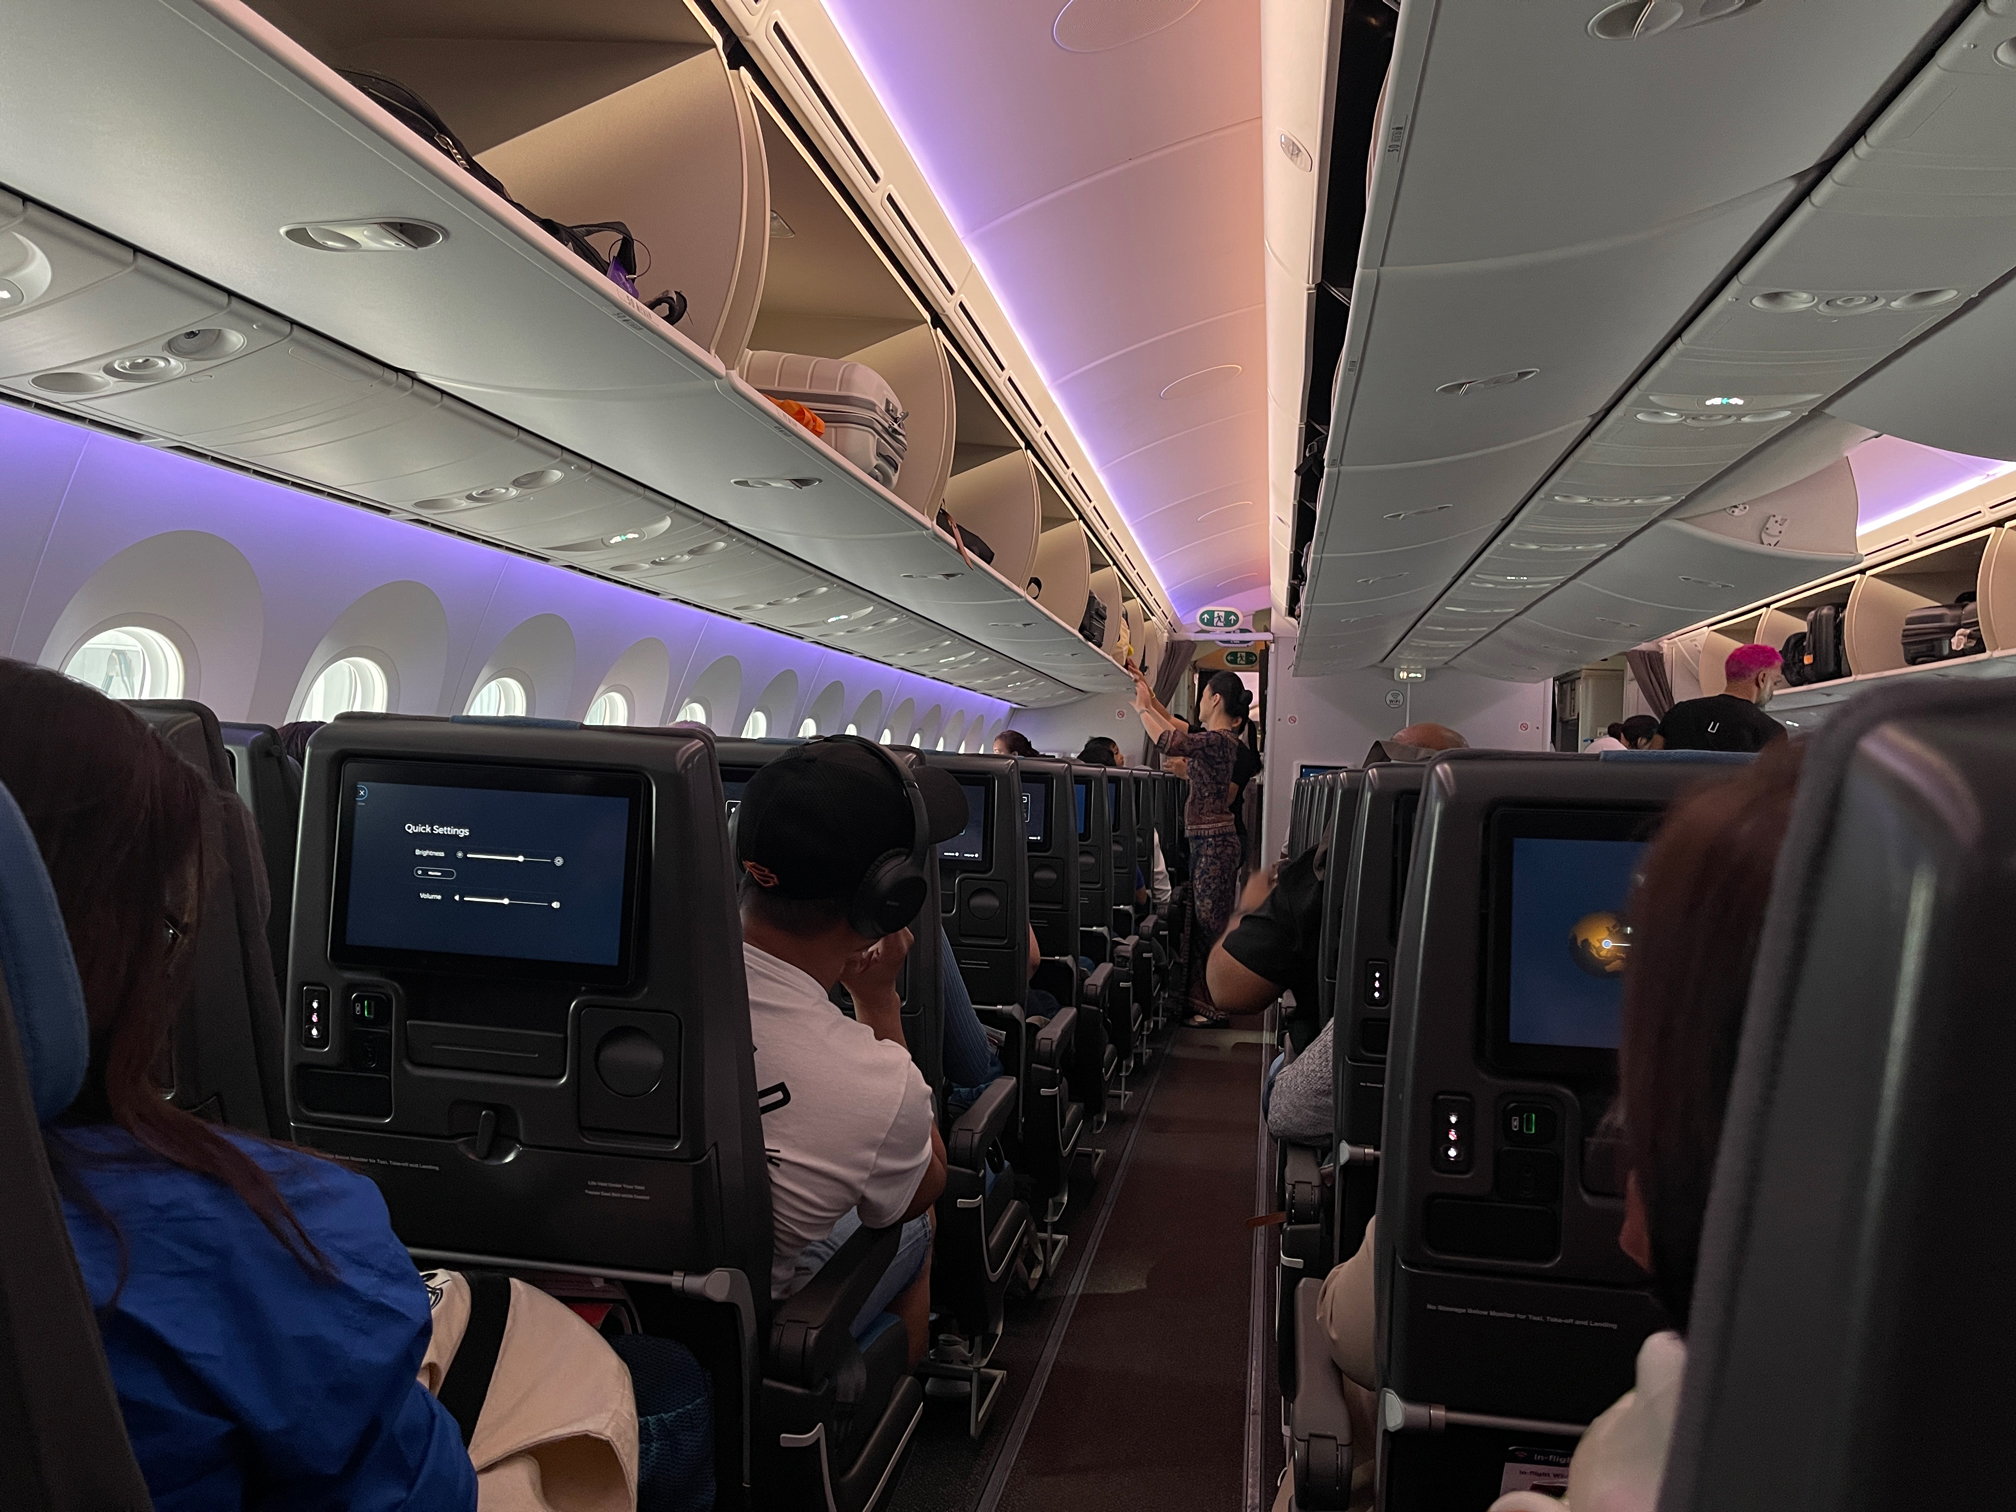 This photo shows the interior of a full airplane with dim lighting.